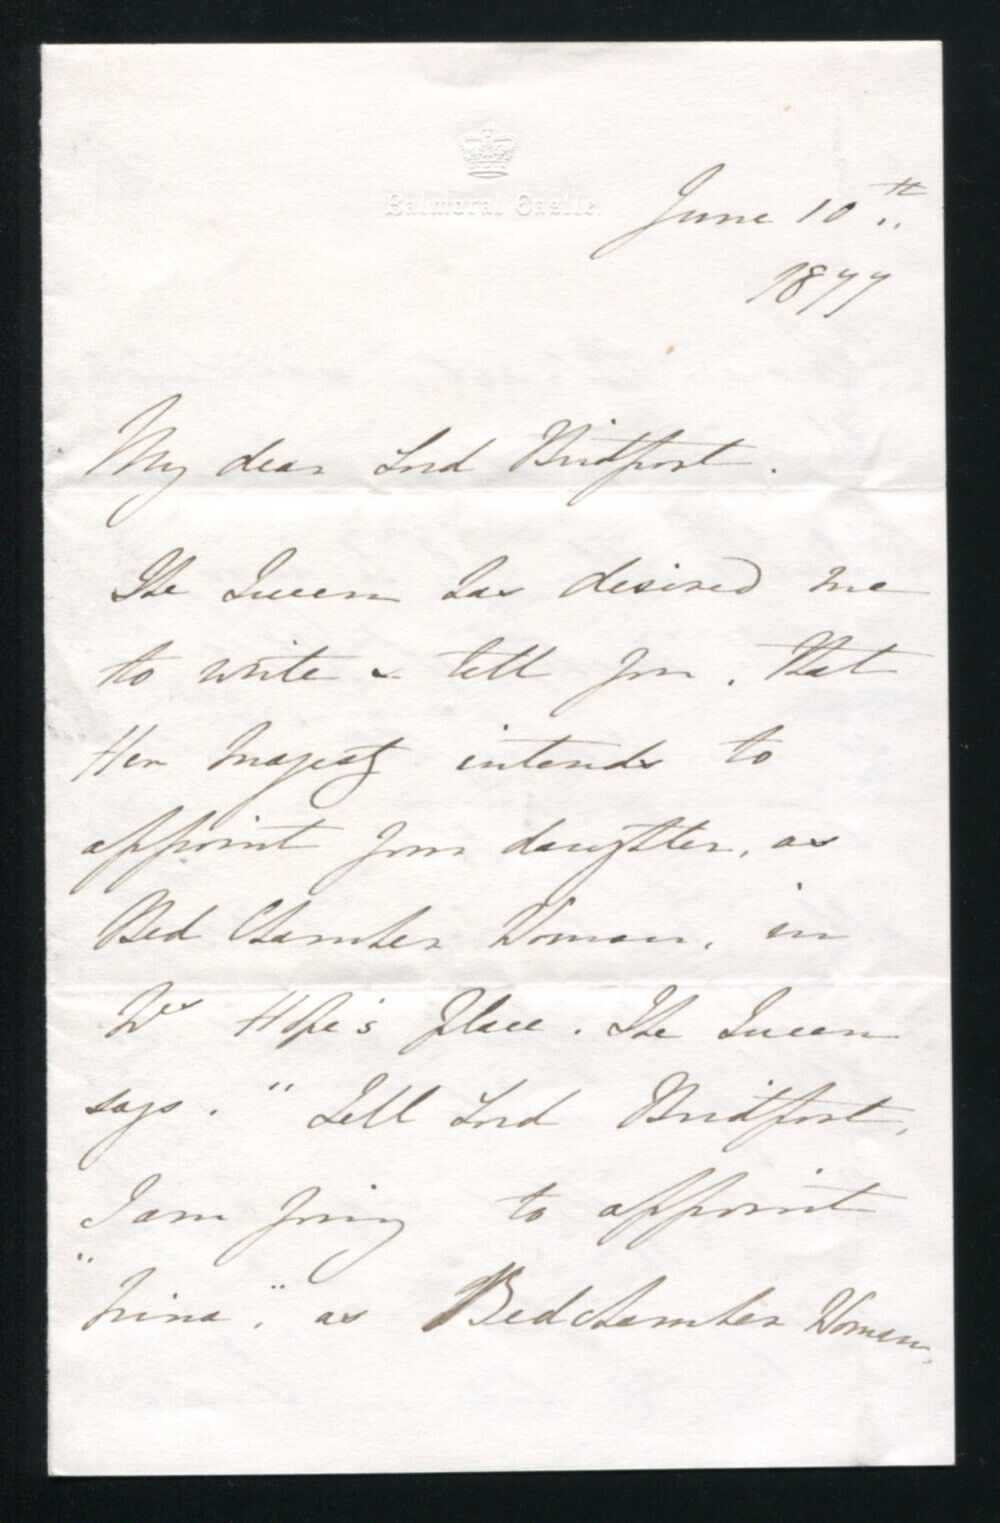 LETTER QUEEN VICTORIA LADY IN WAITING JANE MARCHIONESS ELY LADY BRIDPORT 1877